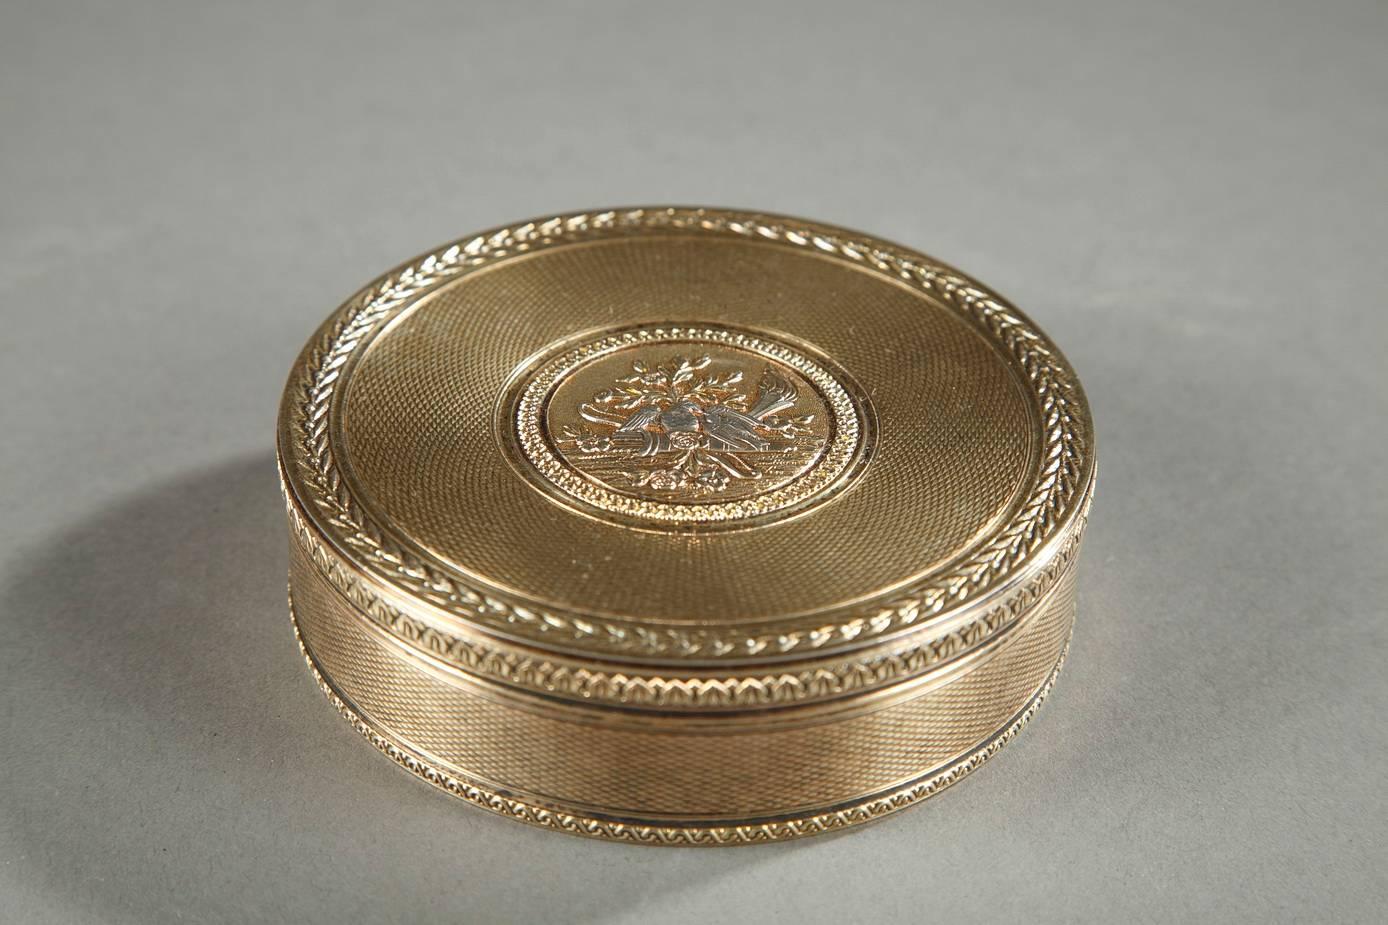 Round, silver jewelry box with silver-gilt interior. It is very intricately engraved with latticework and hemmed by friezes of interlacing and foliage. The lid is adorned with a central medallion representing a dove on a quiver surrounded by flowers